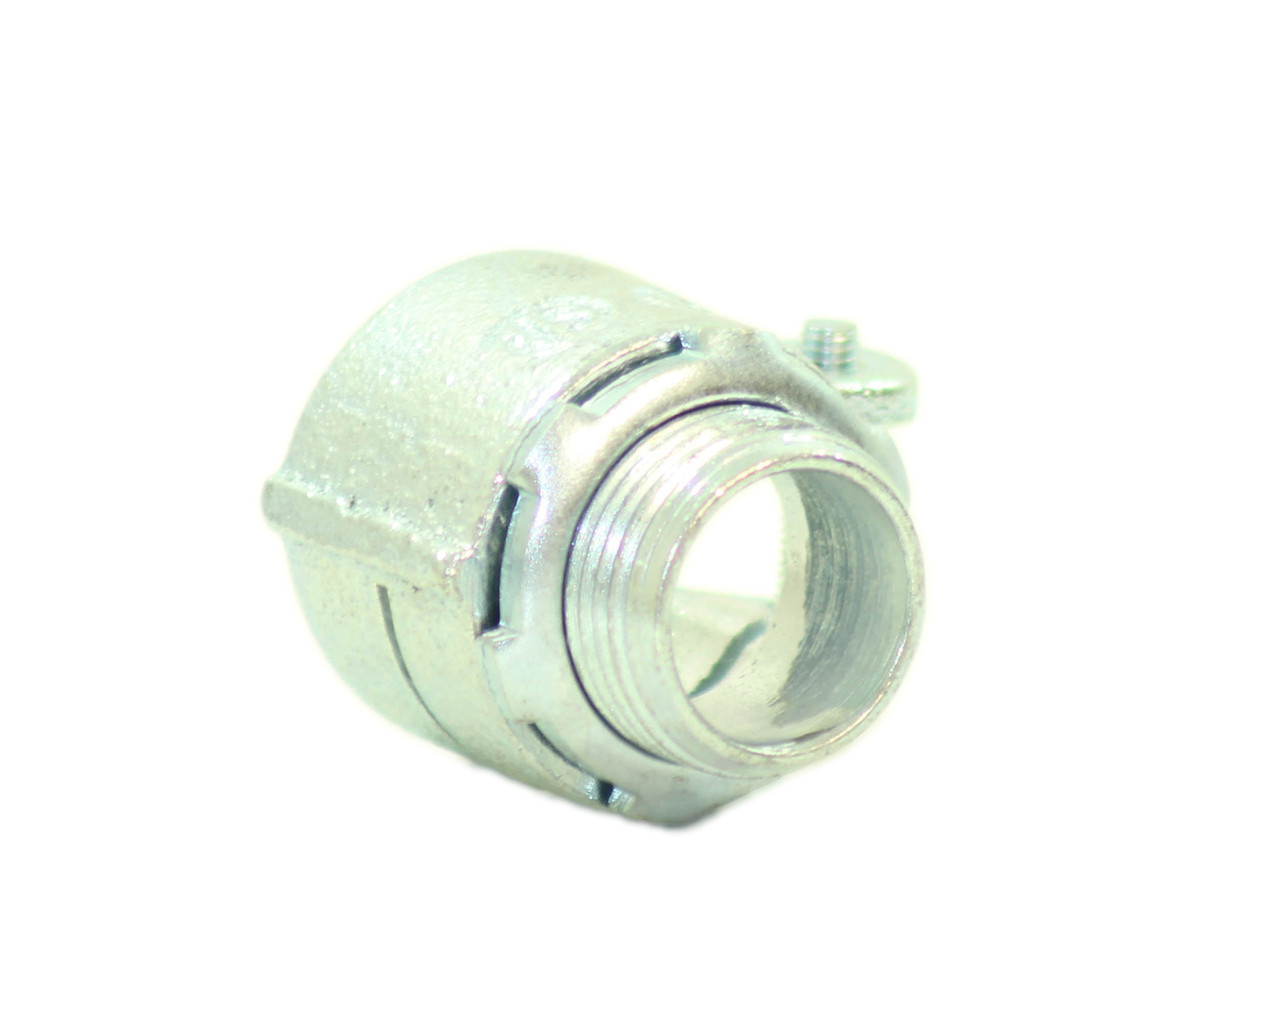 Garvin SQZEMT-75 Combination Coupling Material: Steel Size: 3/4 Inch